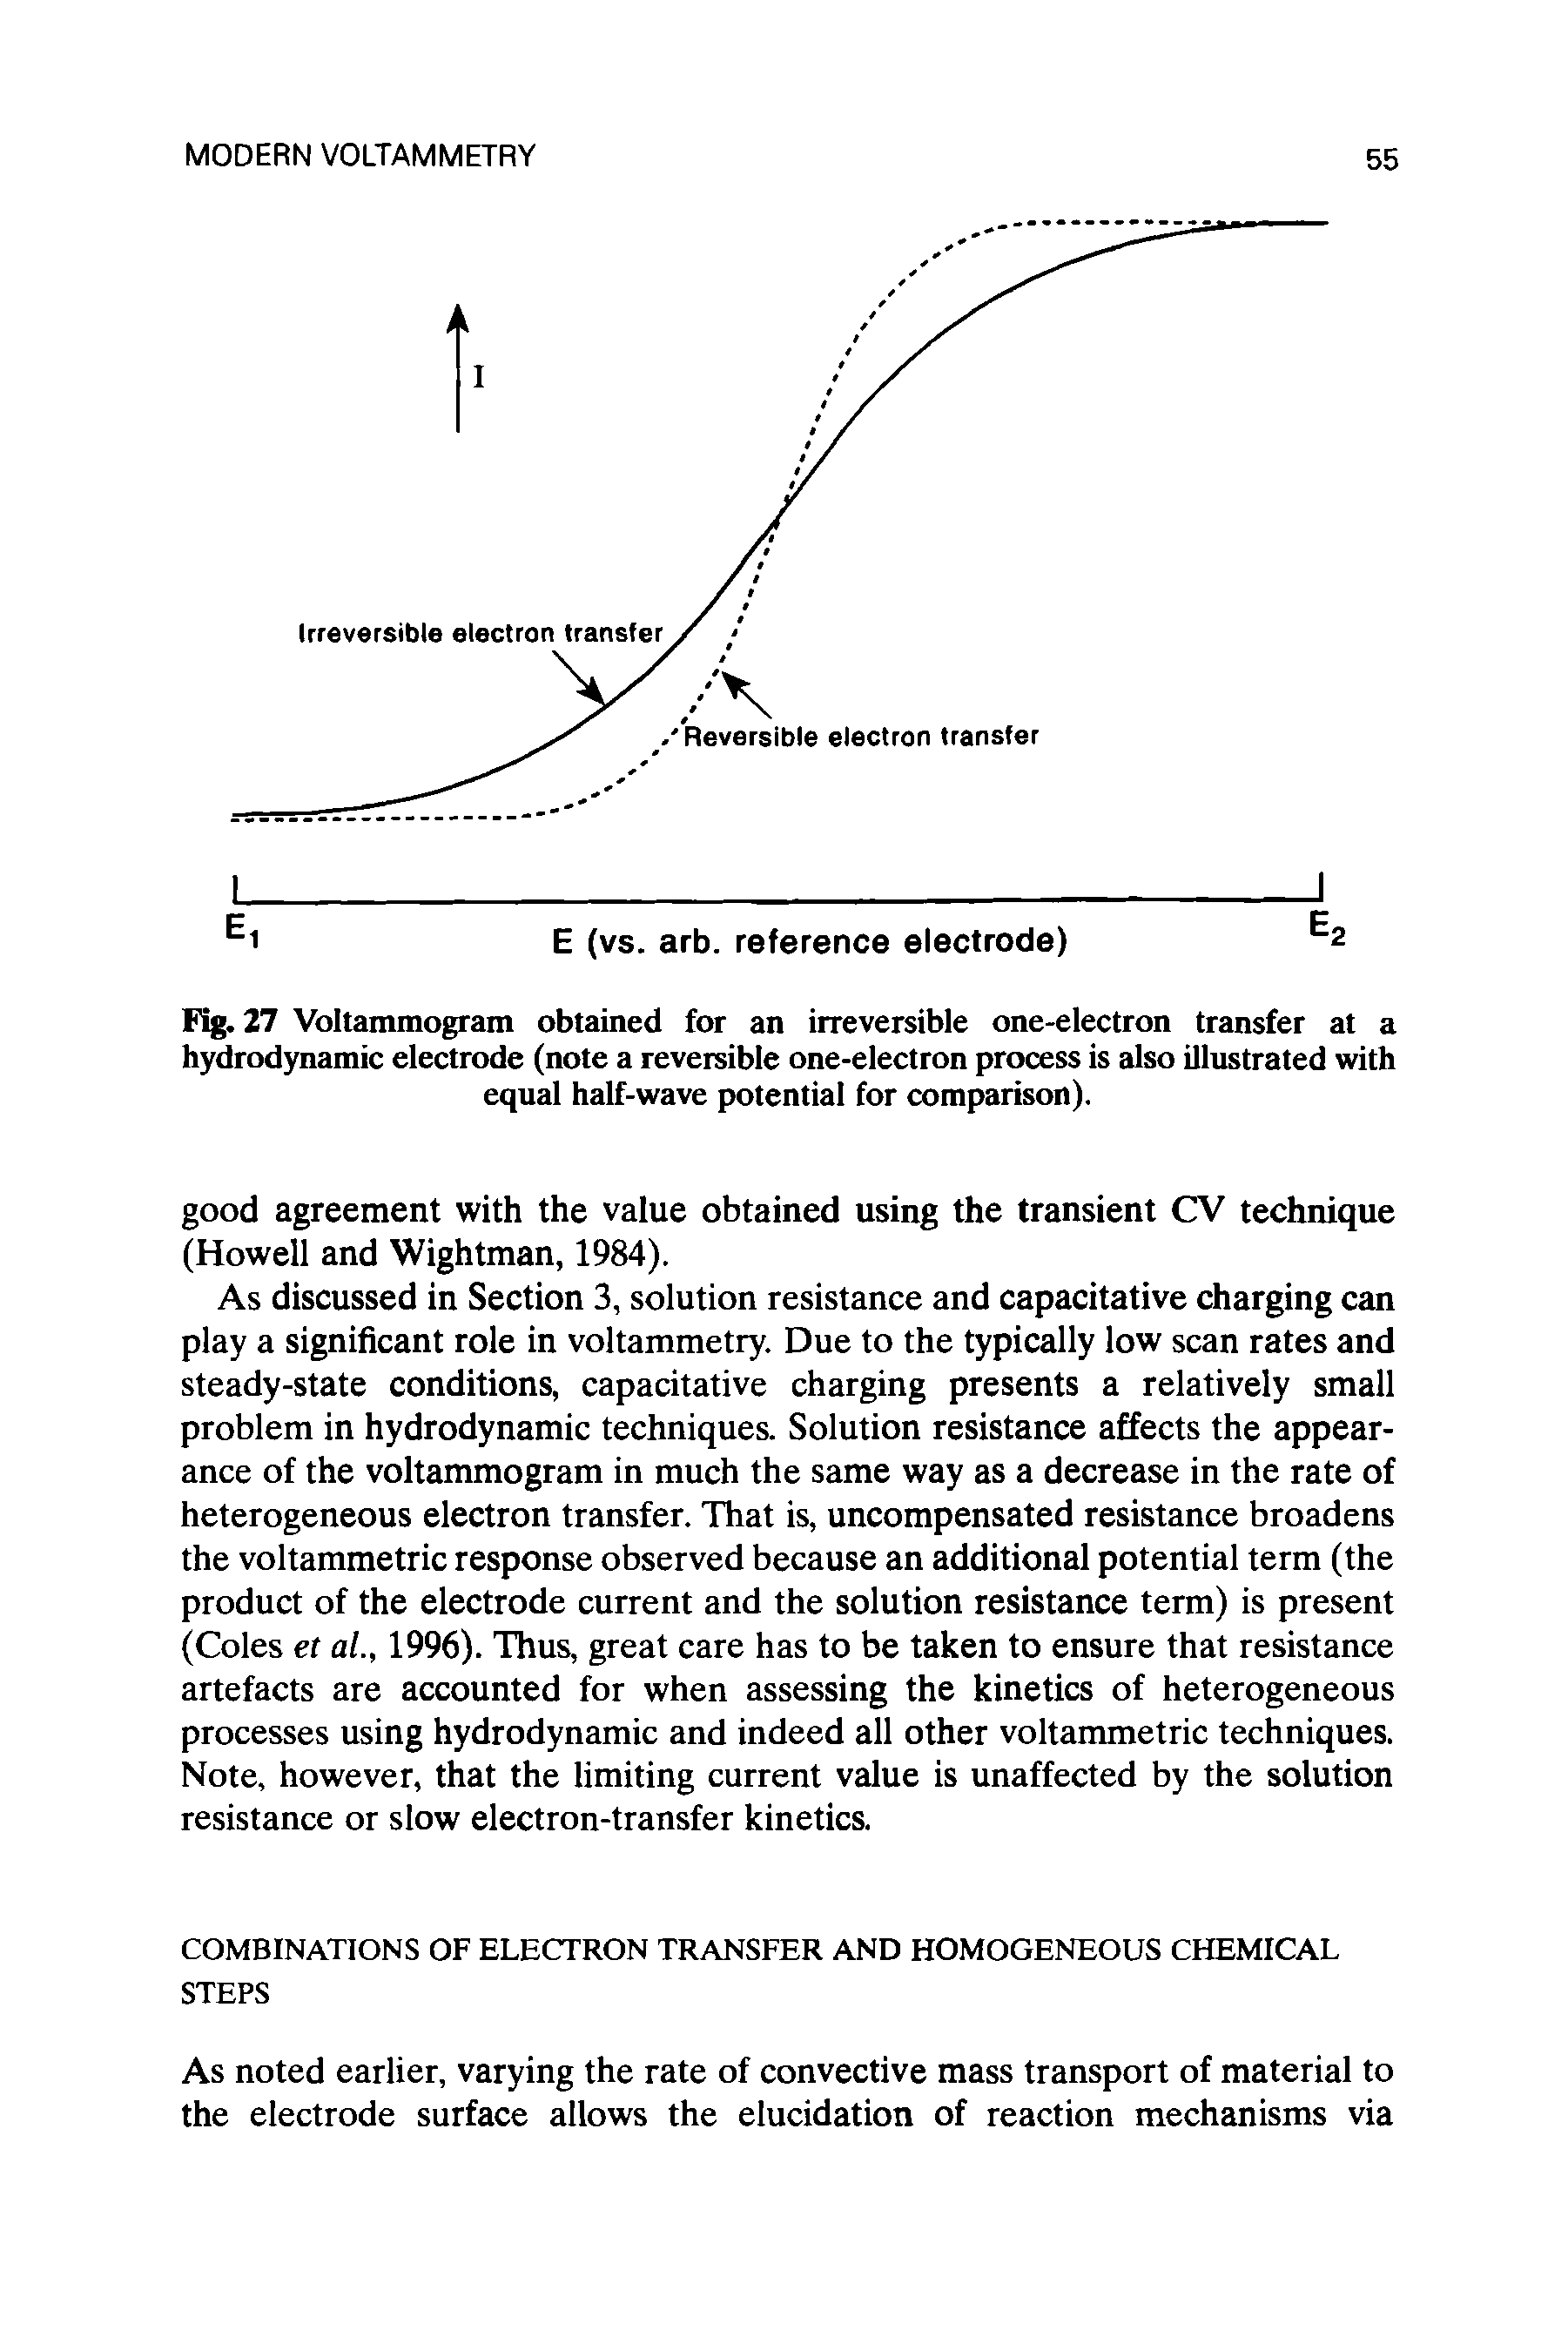 Fig. 27 Voltammogram obtained for an irreversible one-electron transfer at a hydrodynamic electrode (note a reversible one-electron process is also illustrated with equal half-wave potential for comparison).